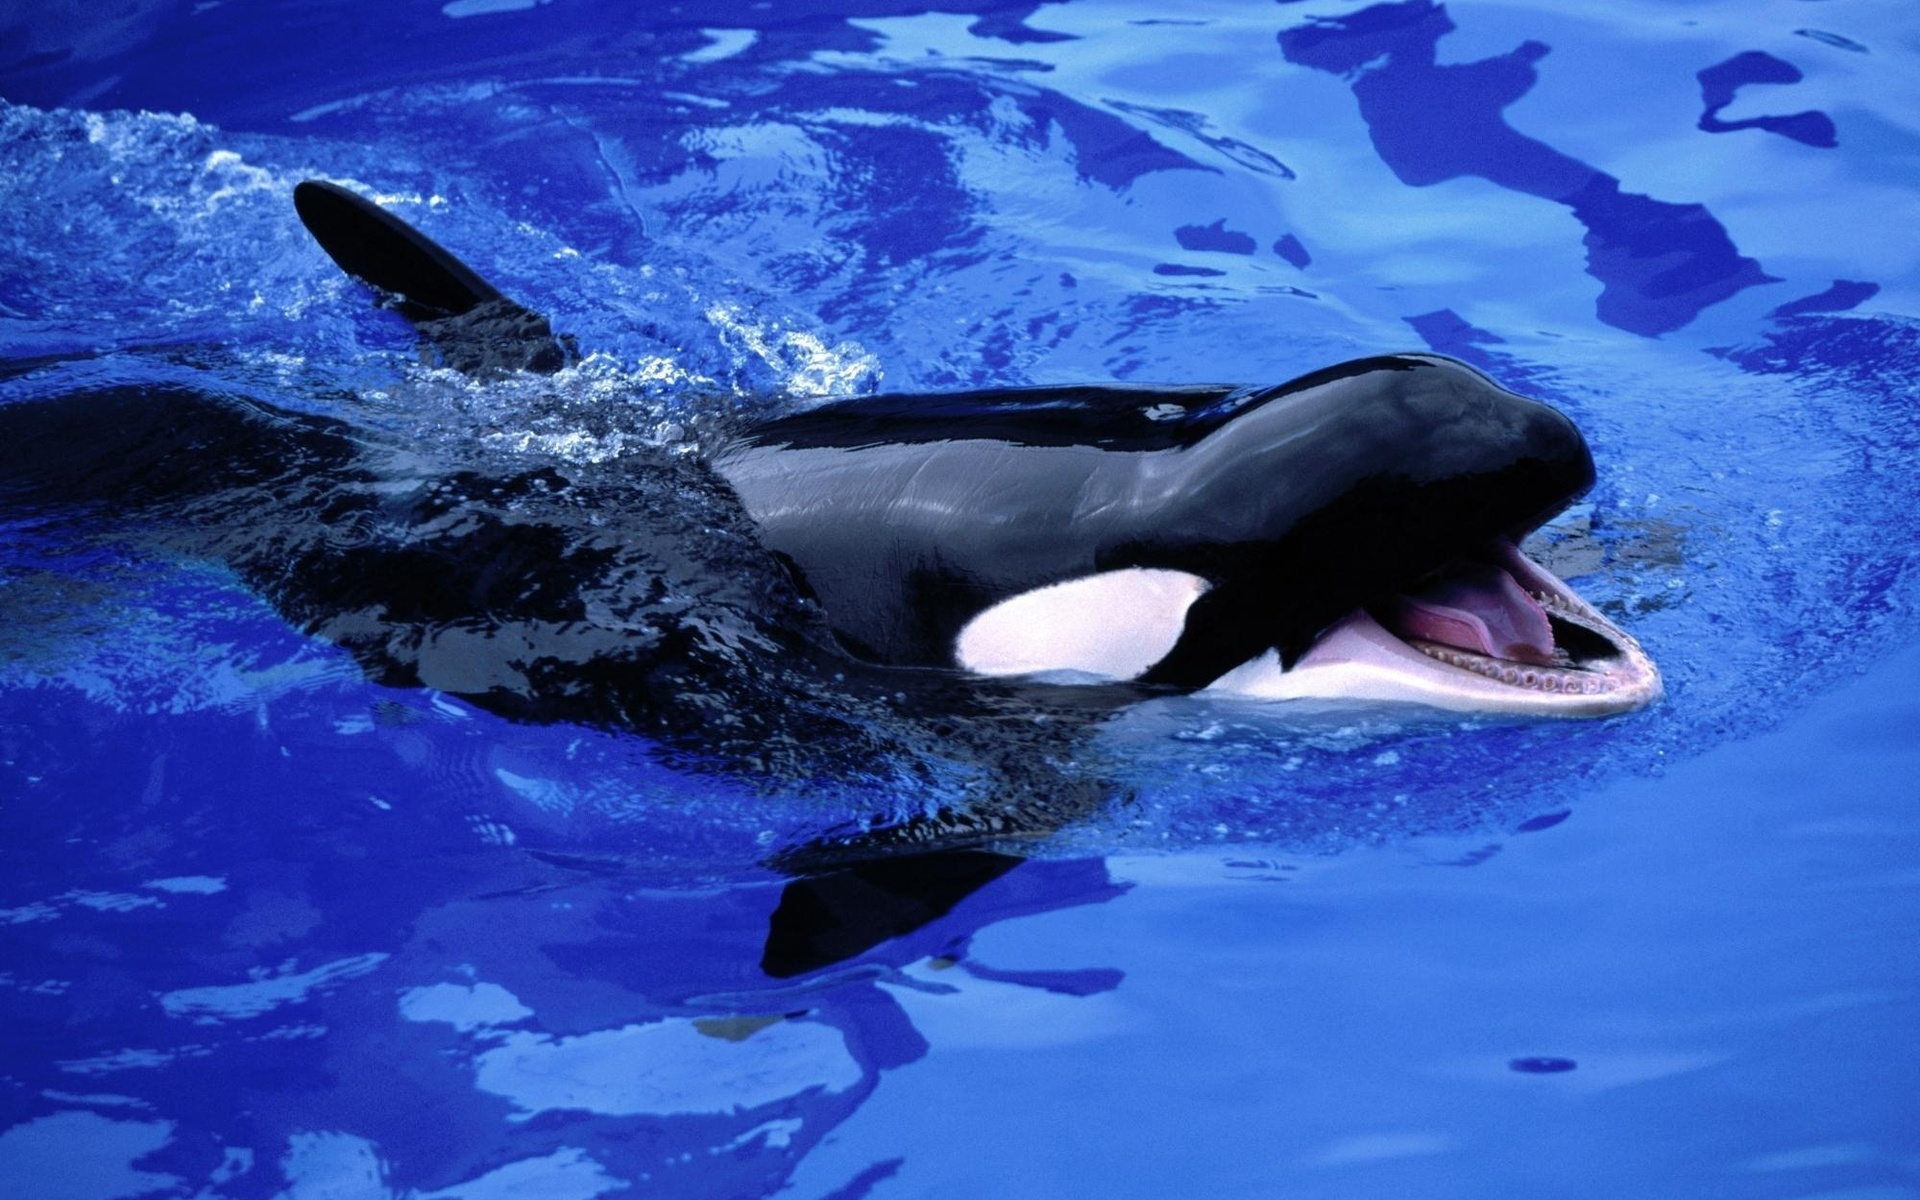 animals, Killer, Whales, Pool, Smile, Expression, Contrast, Black, White, Fins, Teeth, Water, Ripples, Splash, Bubbles, Sea, Life Wallpaper